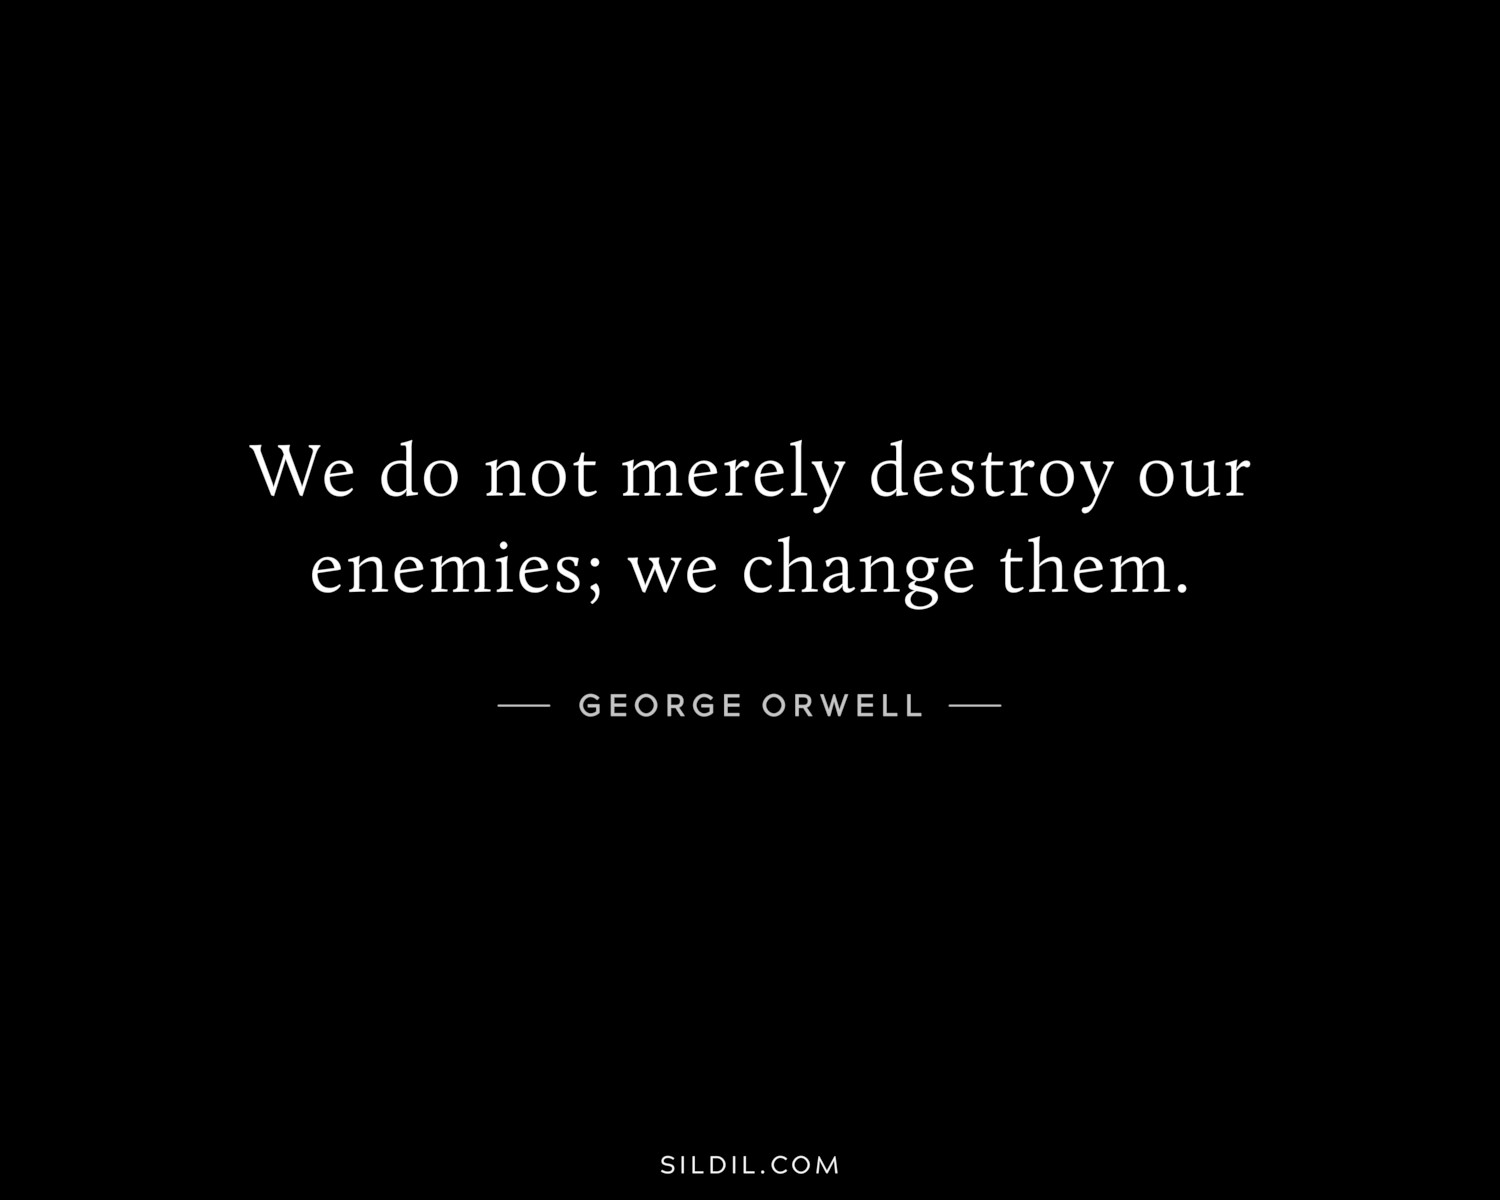 We do not merely destroy our enemies; we change them.